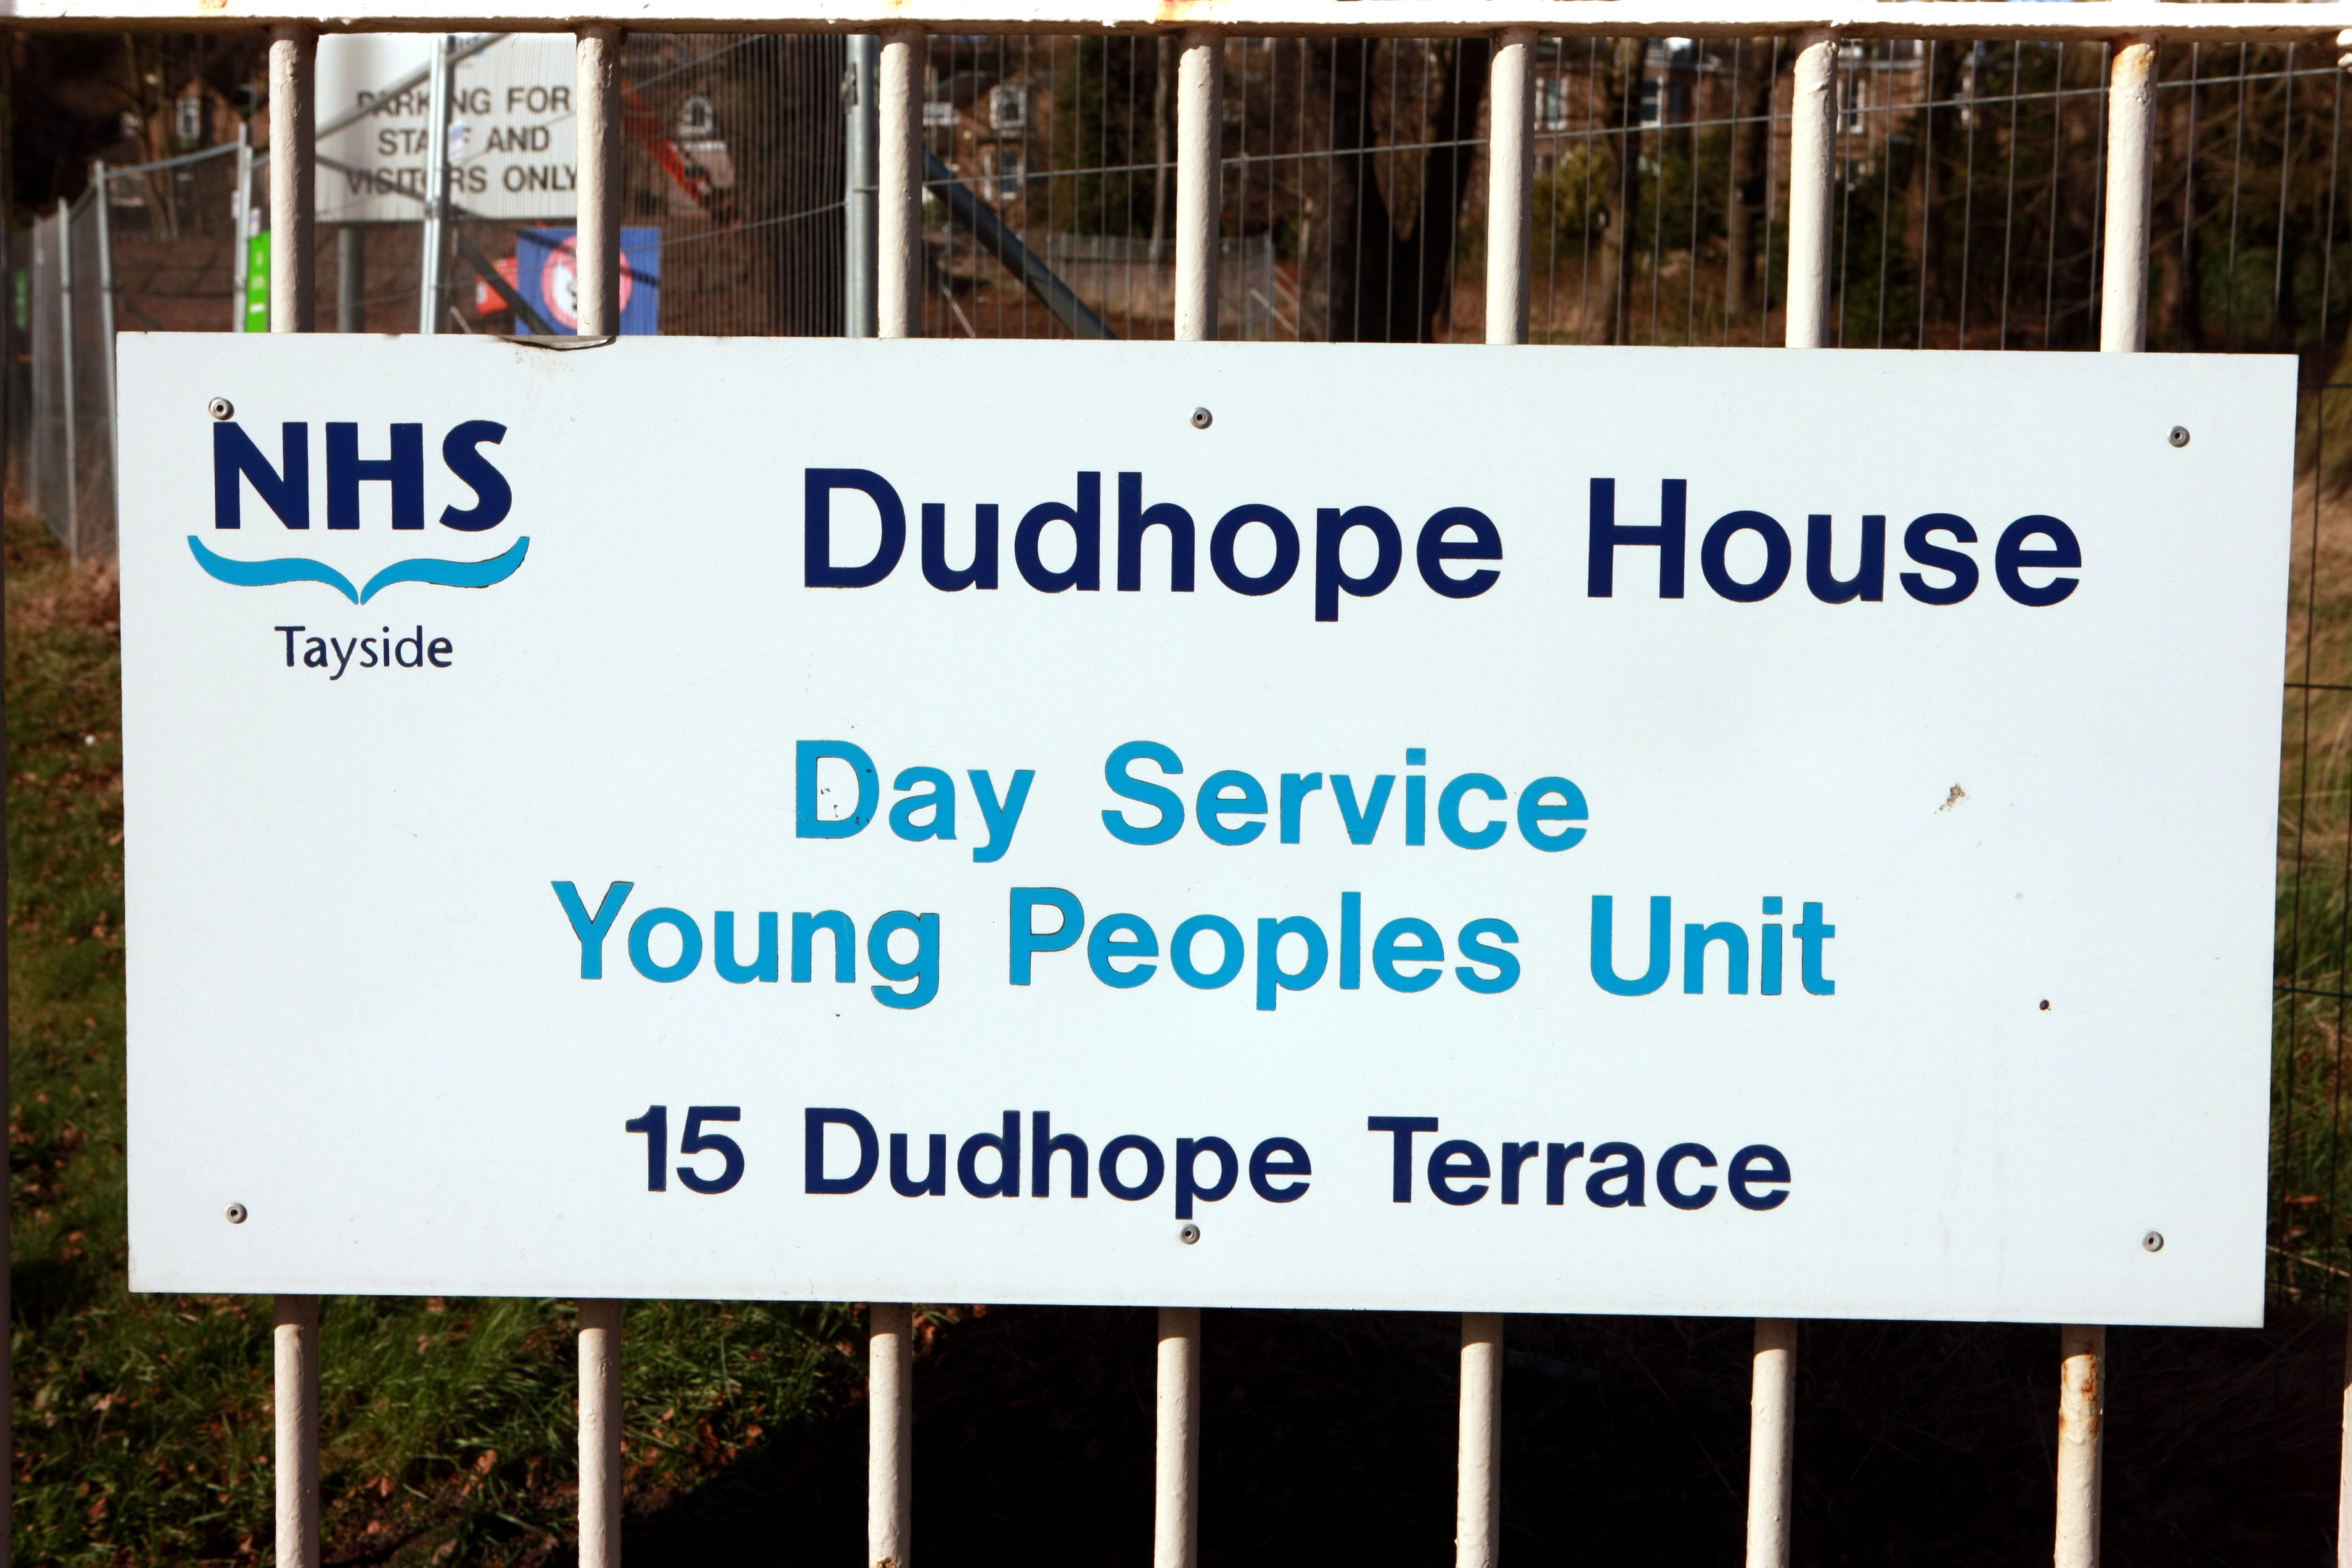 Dudhope House in Dundee provides CAMHS support in Tayside, which has cut waiting times drastically.